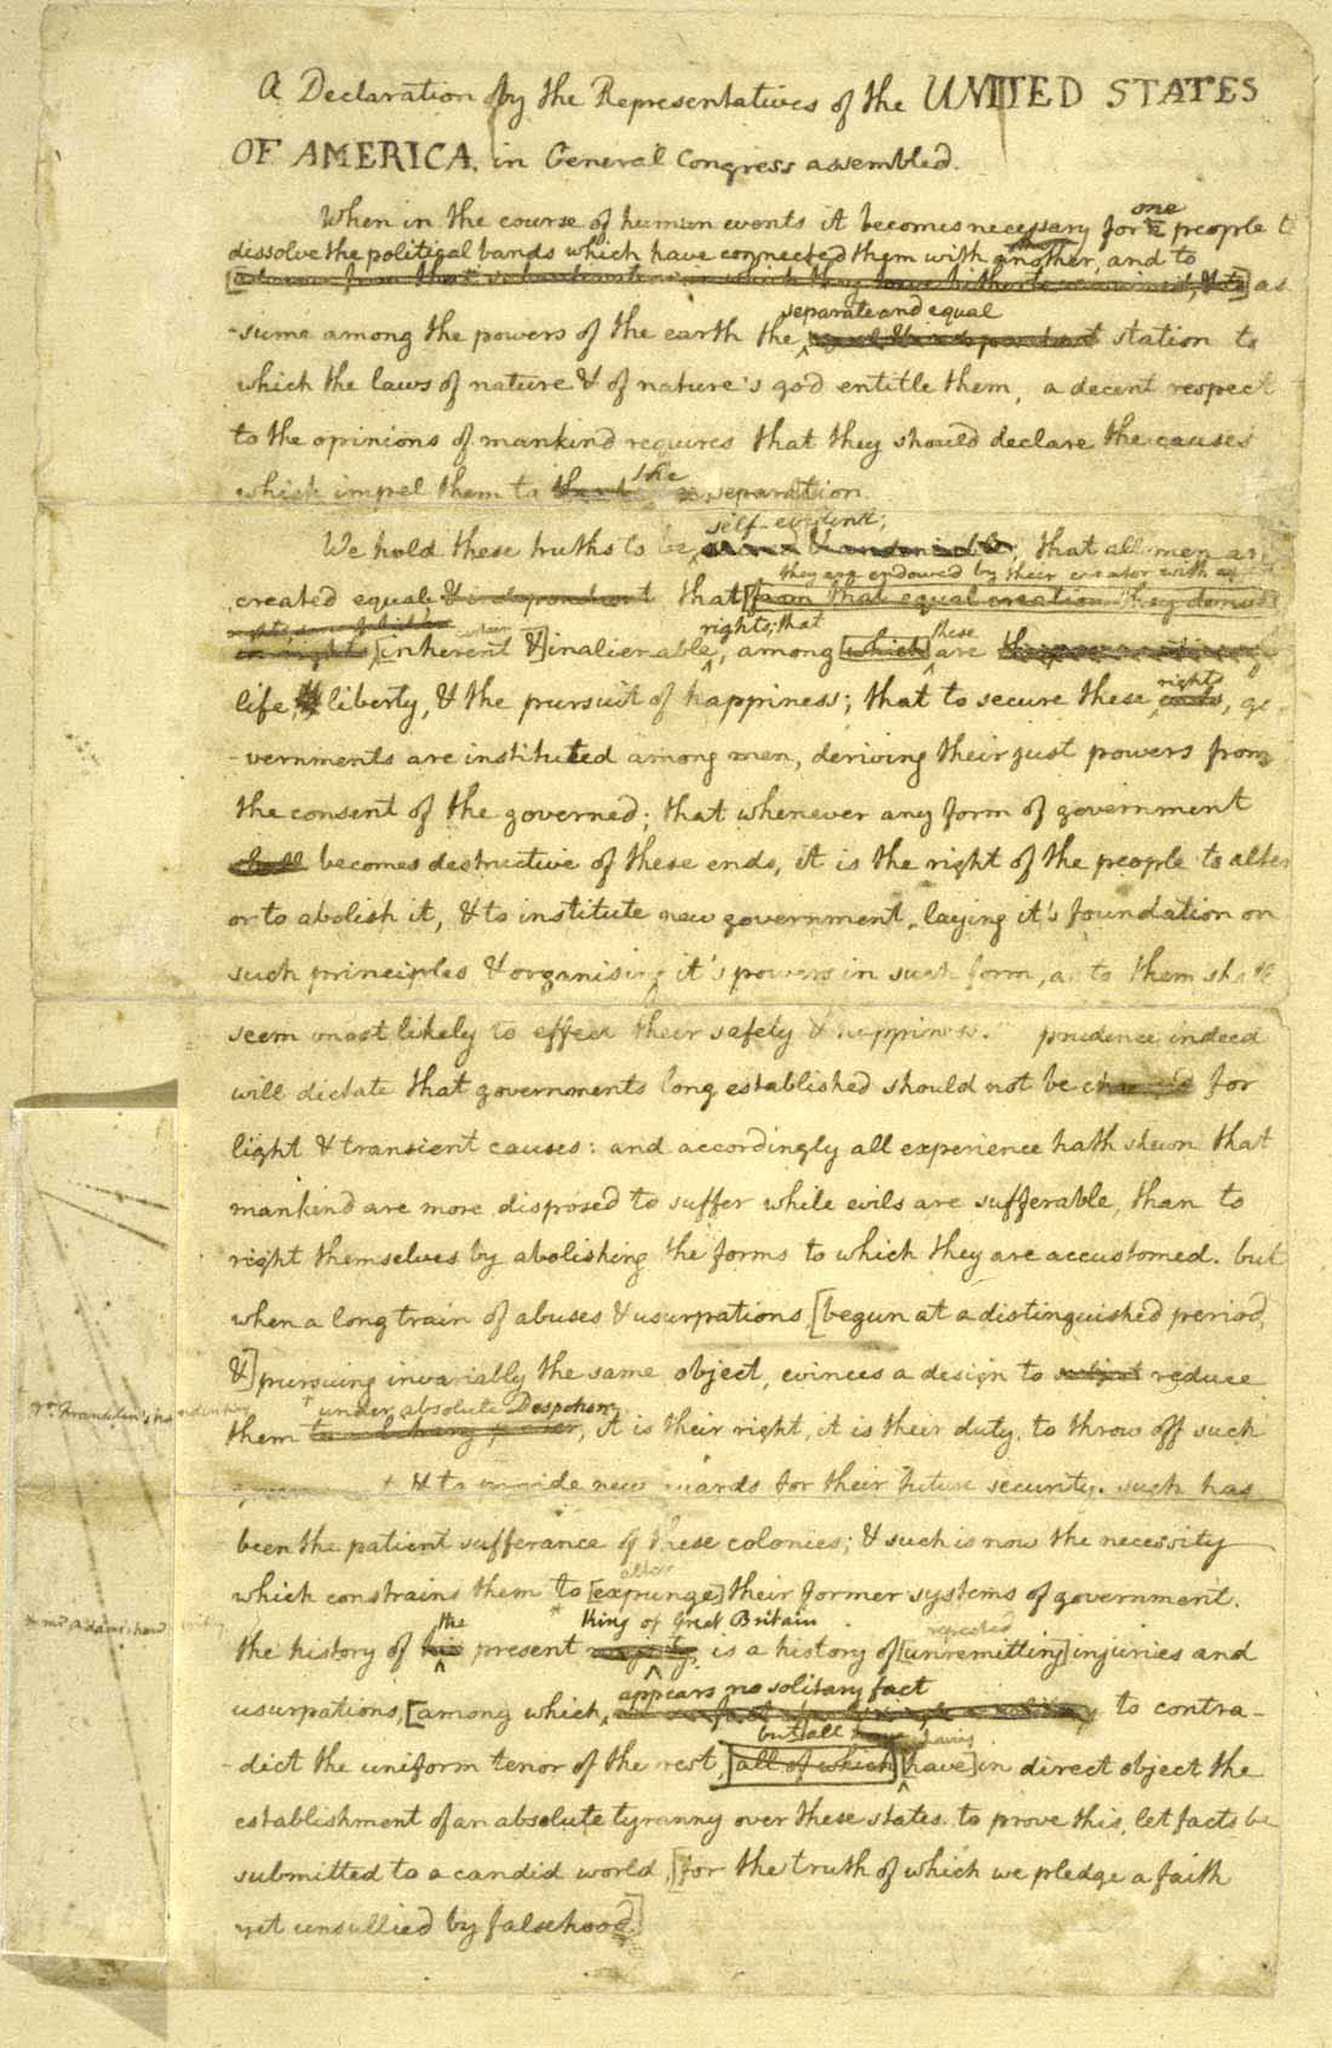 Image of page of Declaration of Independence